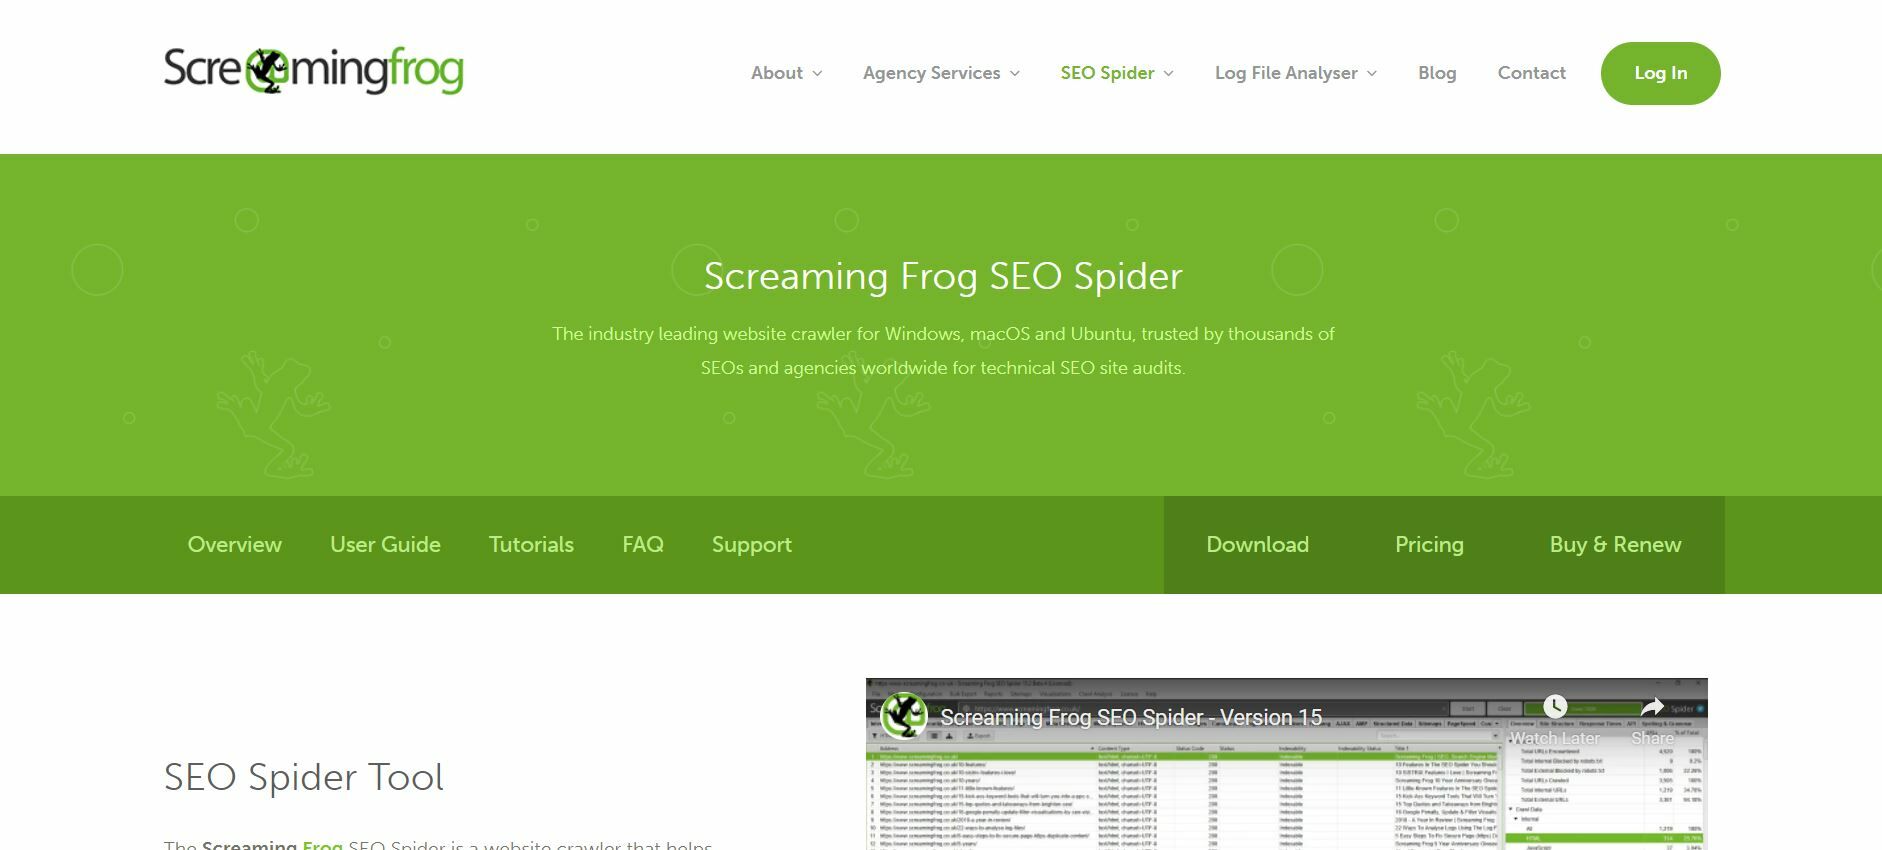 Screaming Frog SEO Spider.